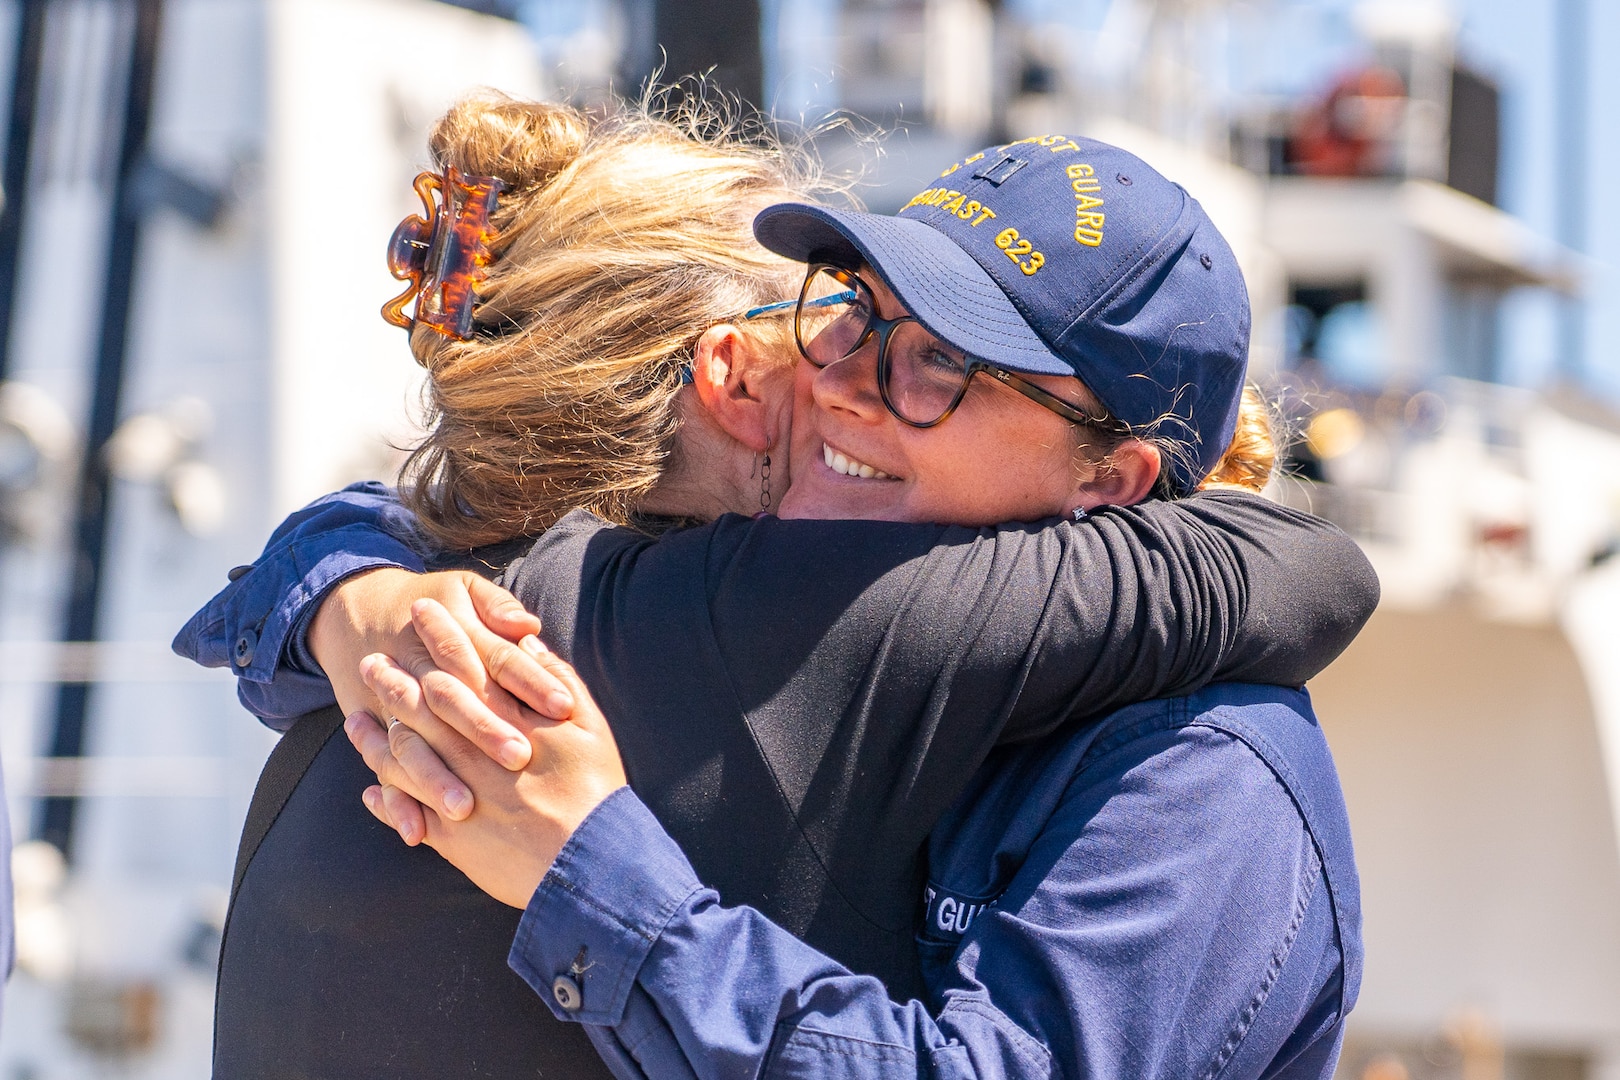 L.t. Cecelia Hosley, the operations officer aboard USCGC Steadfast hugs a visitor after the cutter crew arrived back to their homeport in Astoria, Oregon, following a patrol July 21, 2023. Steadfast is a 210-foot reliance class cutter. (U.S. Coast Guard photo by Petty Officer 1st Class Travis Magee)